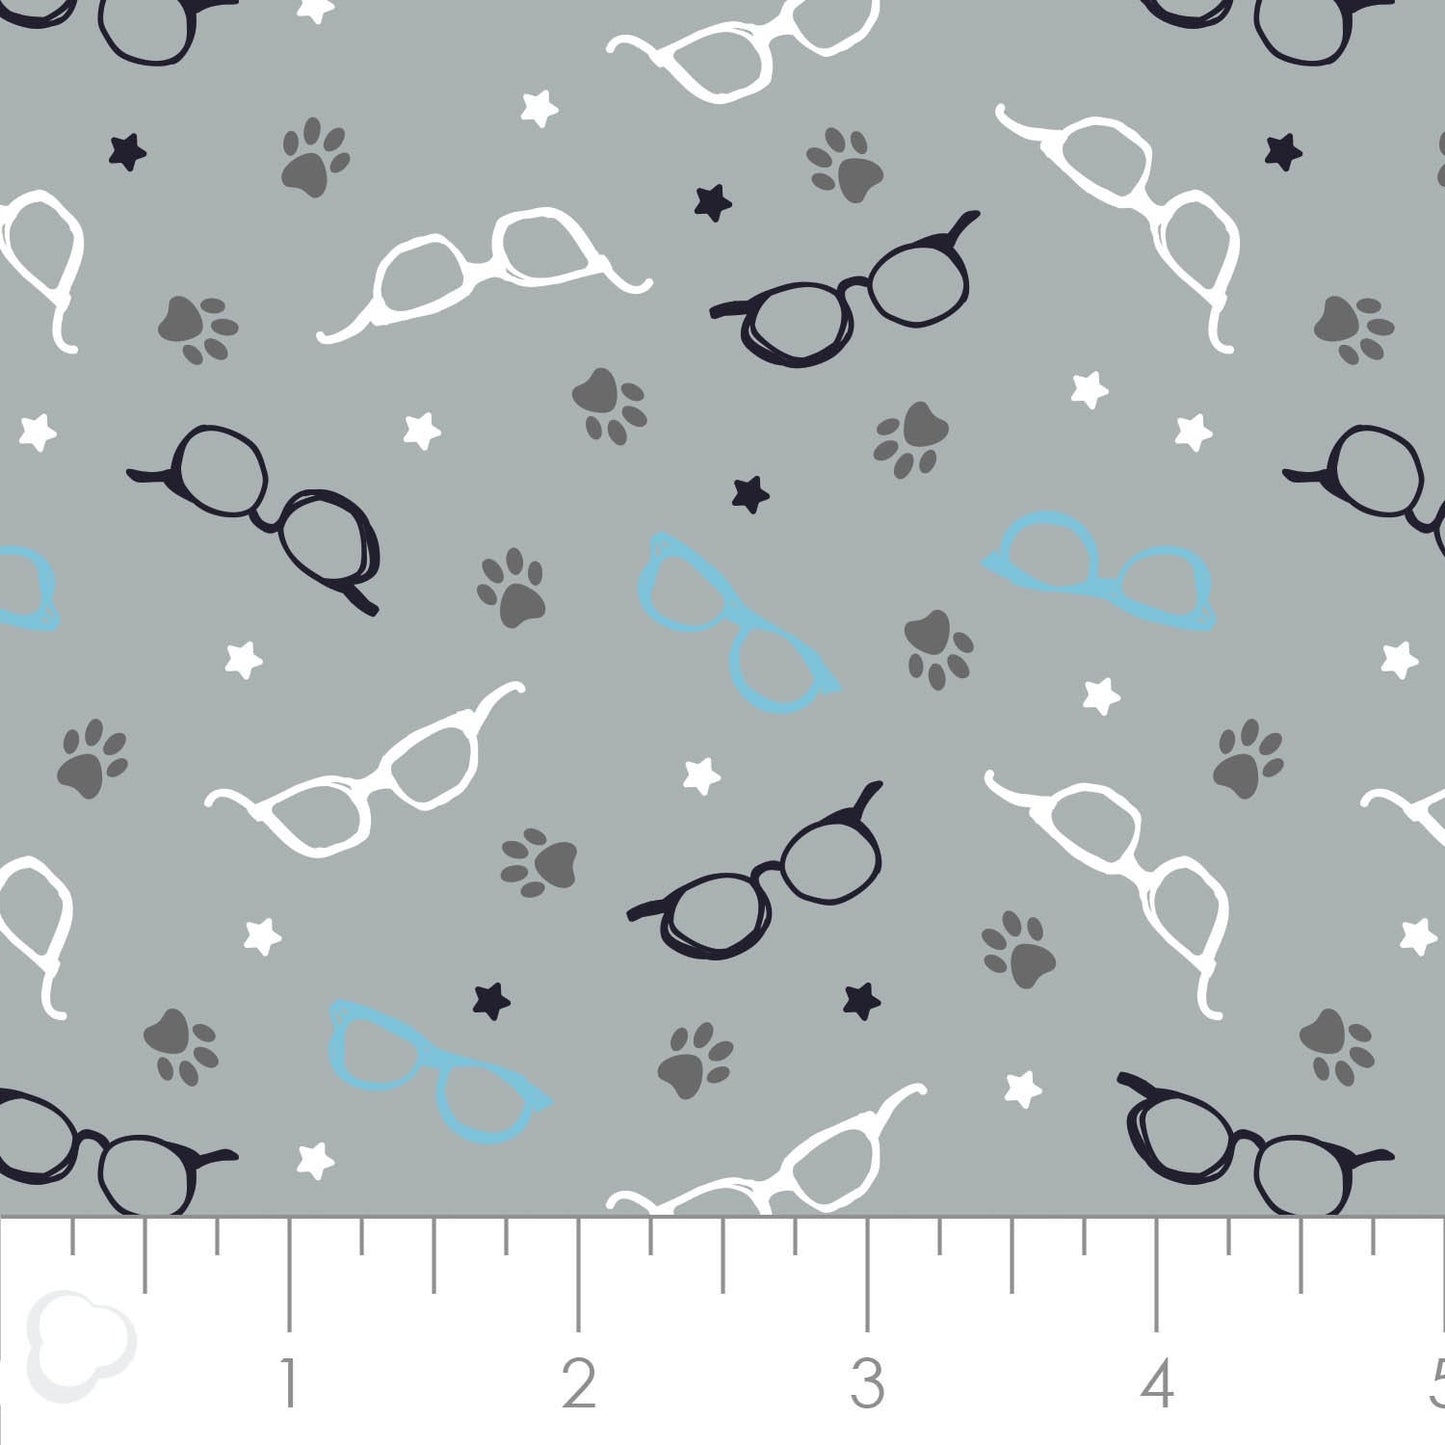 Cats Rule Glasses in Grey 34180105-2 Cotton Woven Fabric